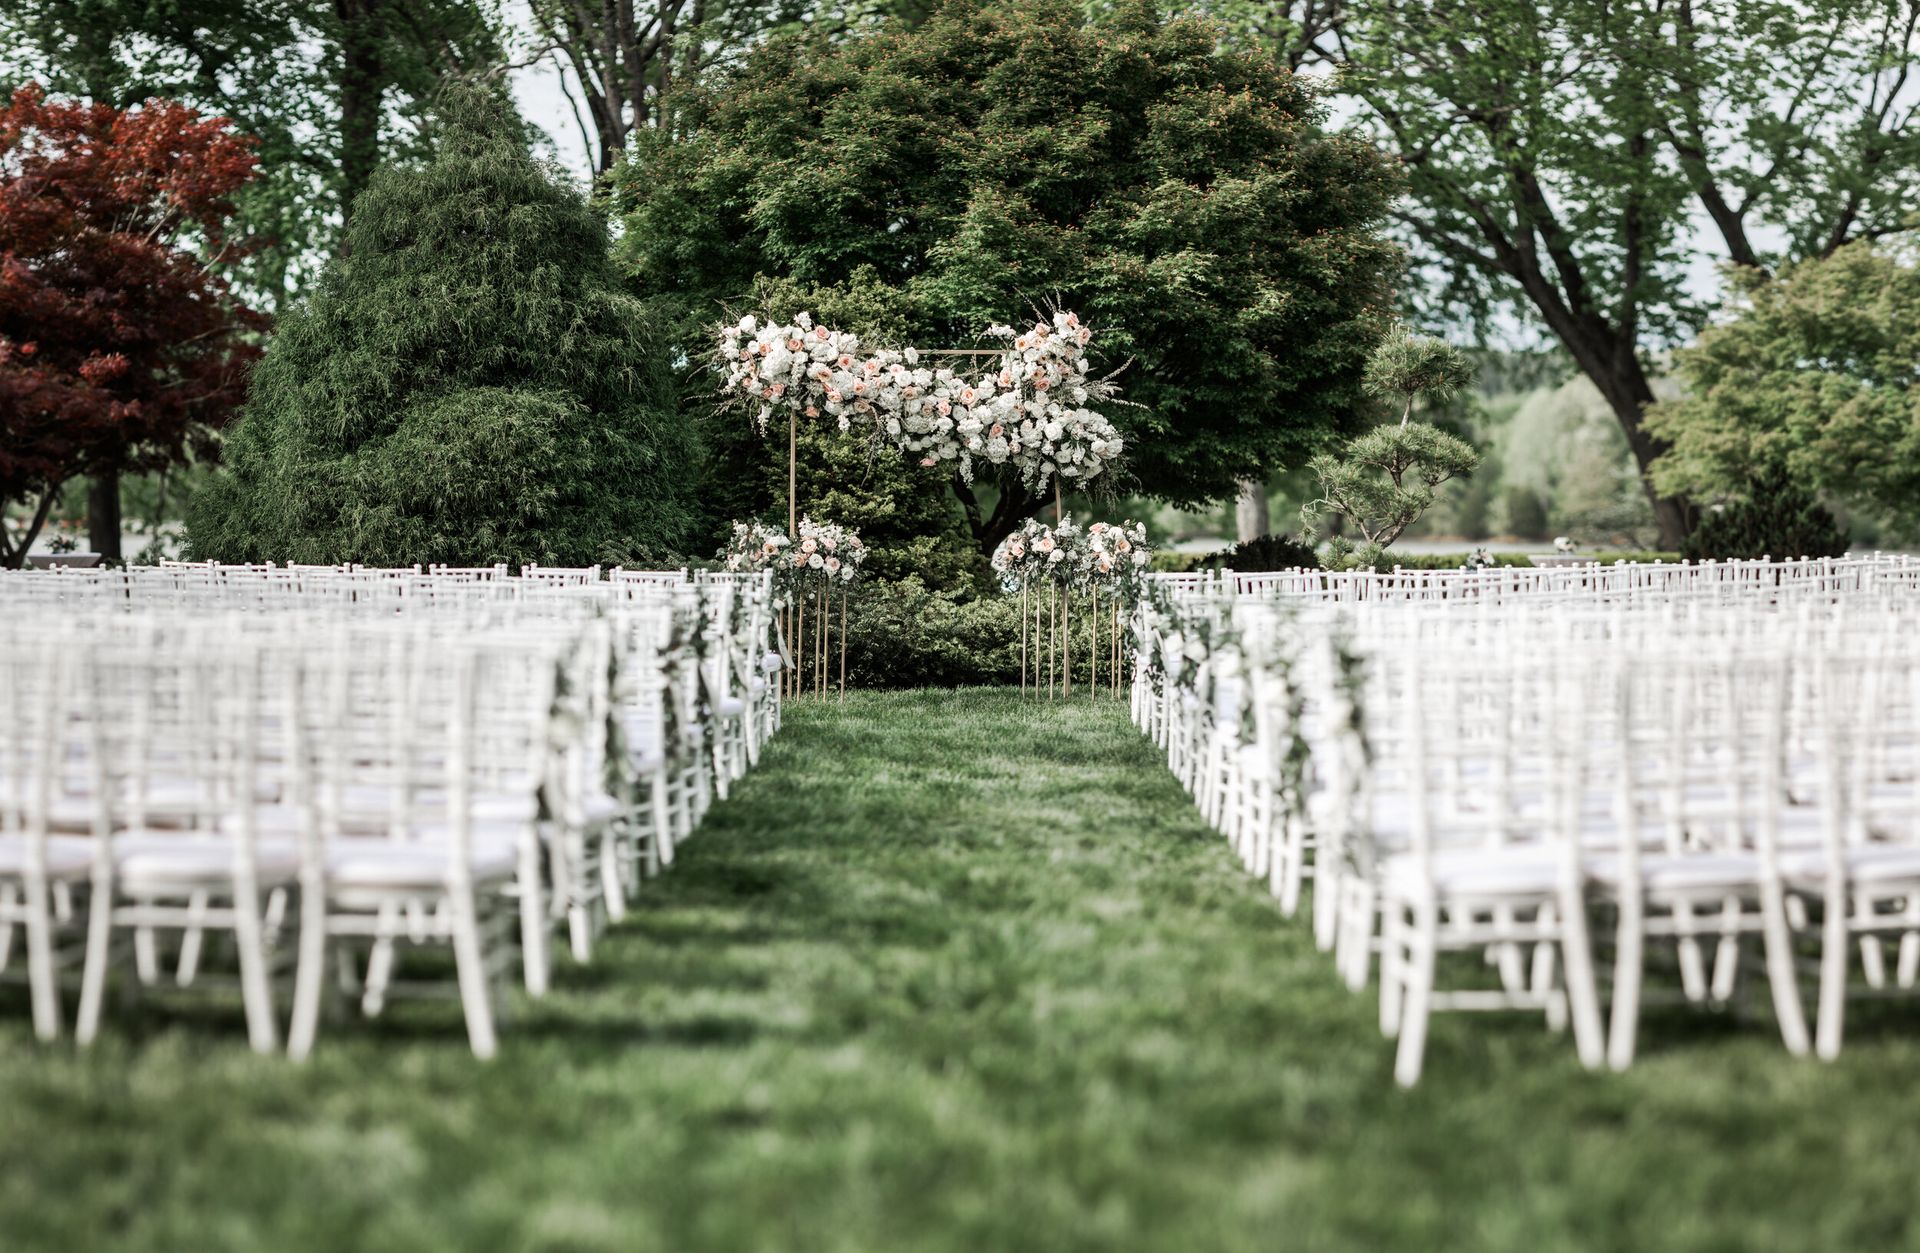 Row of white chairs are lined up in a grassy field for a wedding ceremony by Wedding Planner Nashville